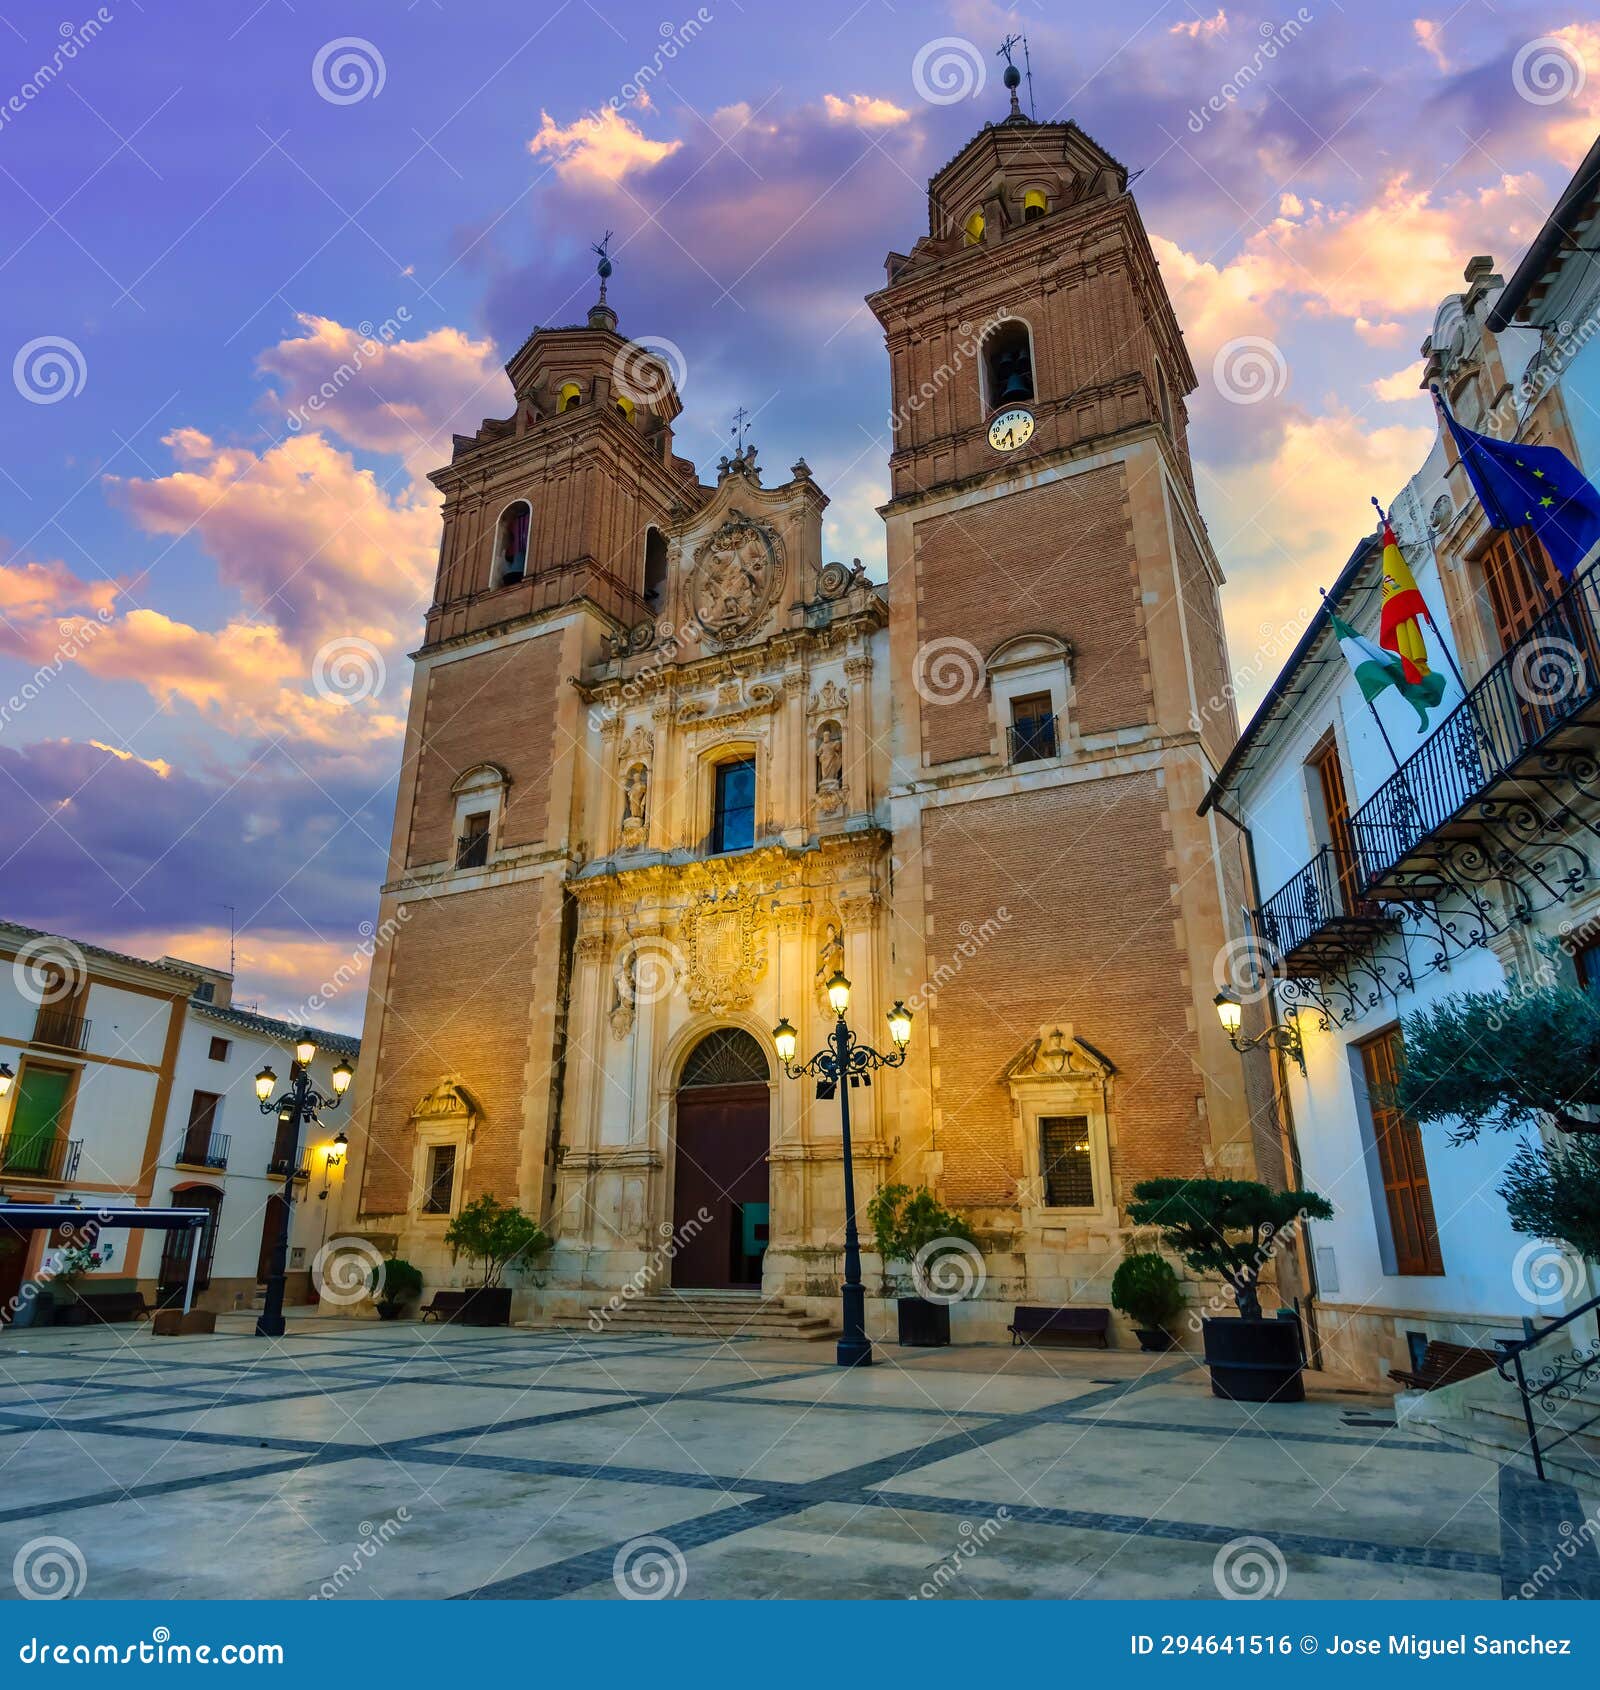 church of the immaculate virgin at sunset with lights on, velez rubio, almeria, spain.